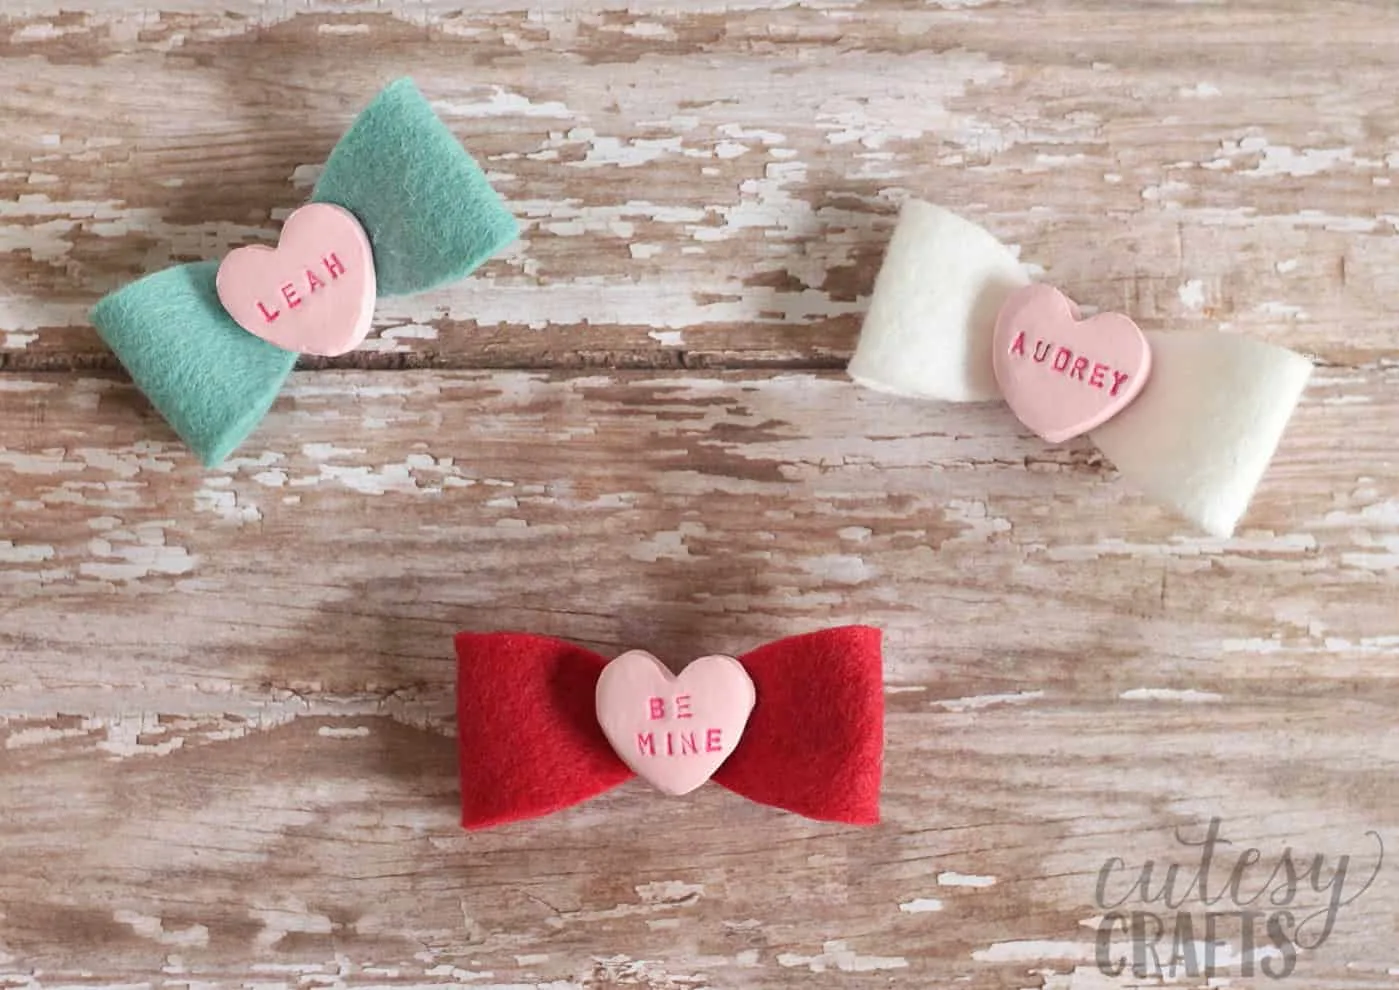 6 Hair clips diy ideas CRAFTS EVERY GIRL WILL FALL IN LOVE WITH